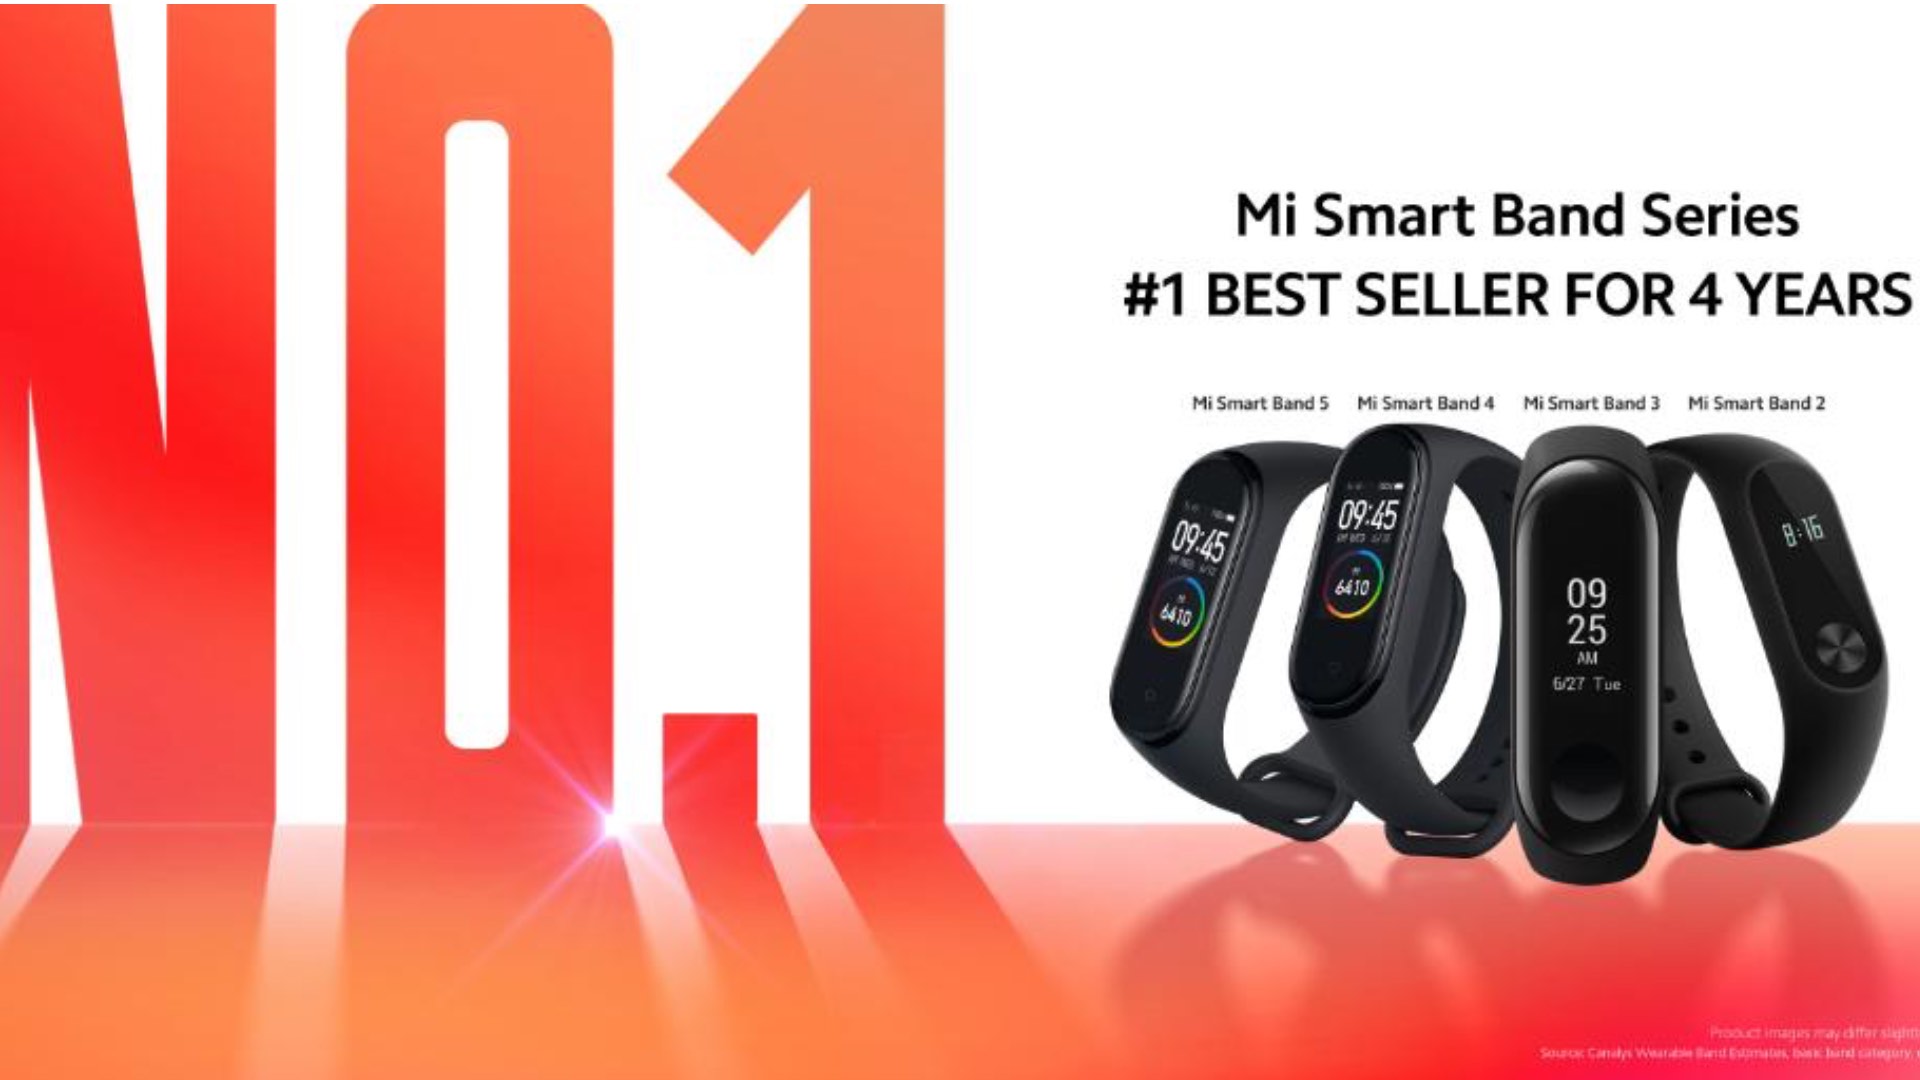 Xiaomi Mi Band has been at the top of Global sales for four years -  